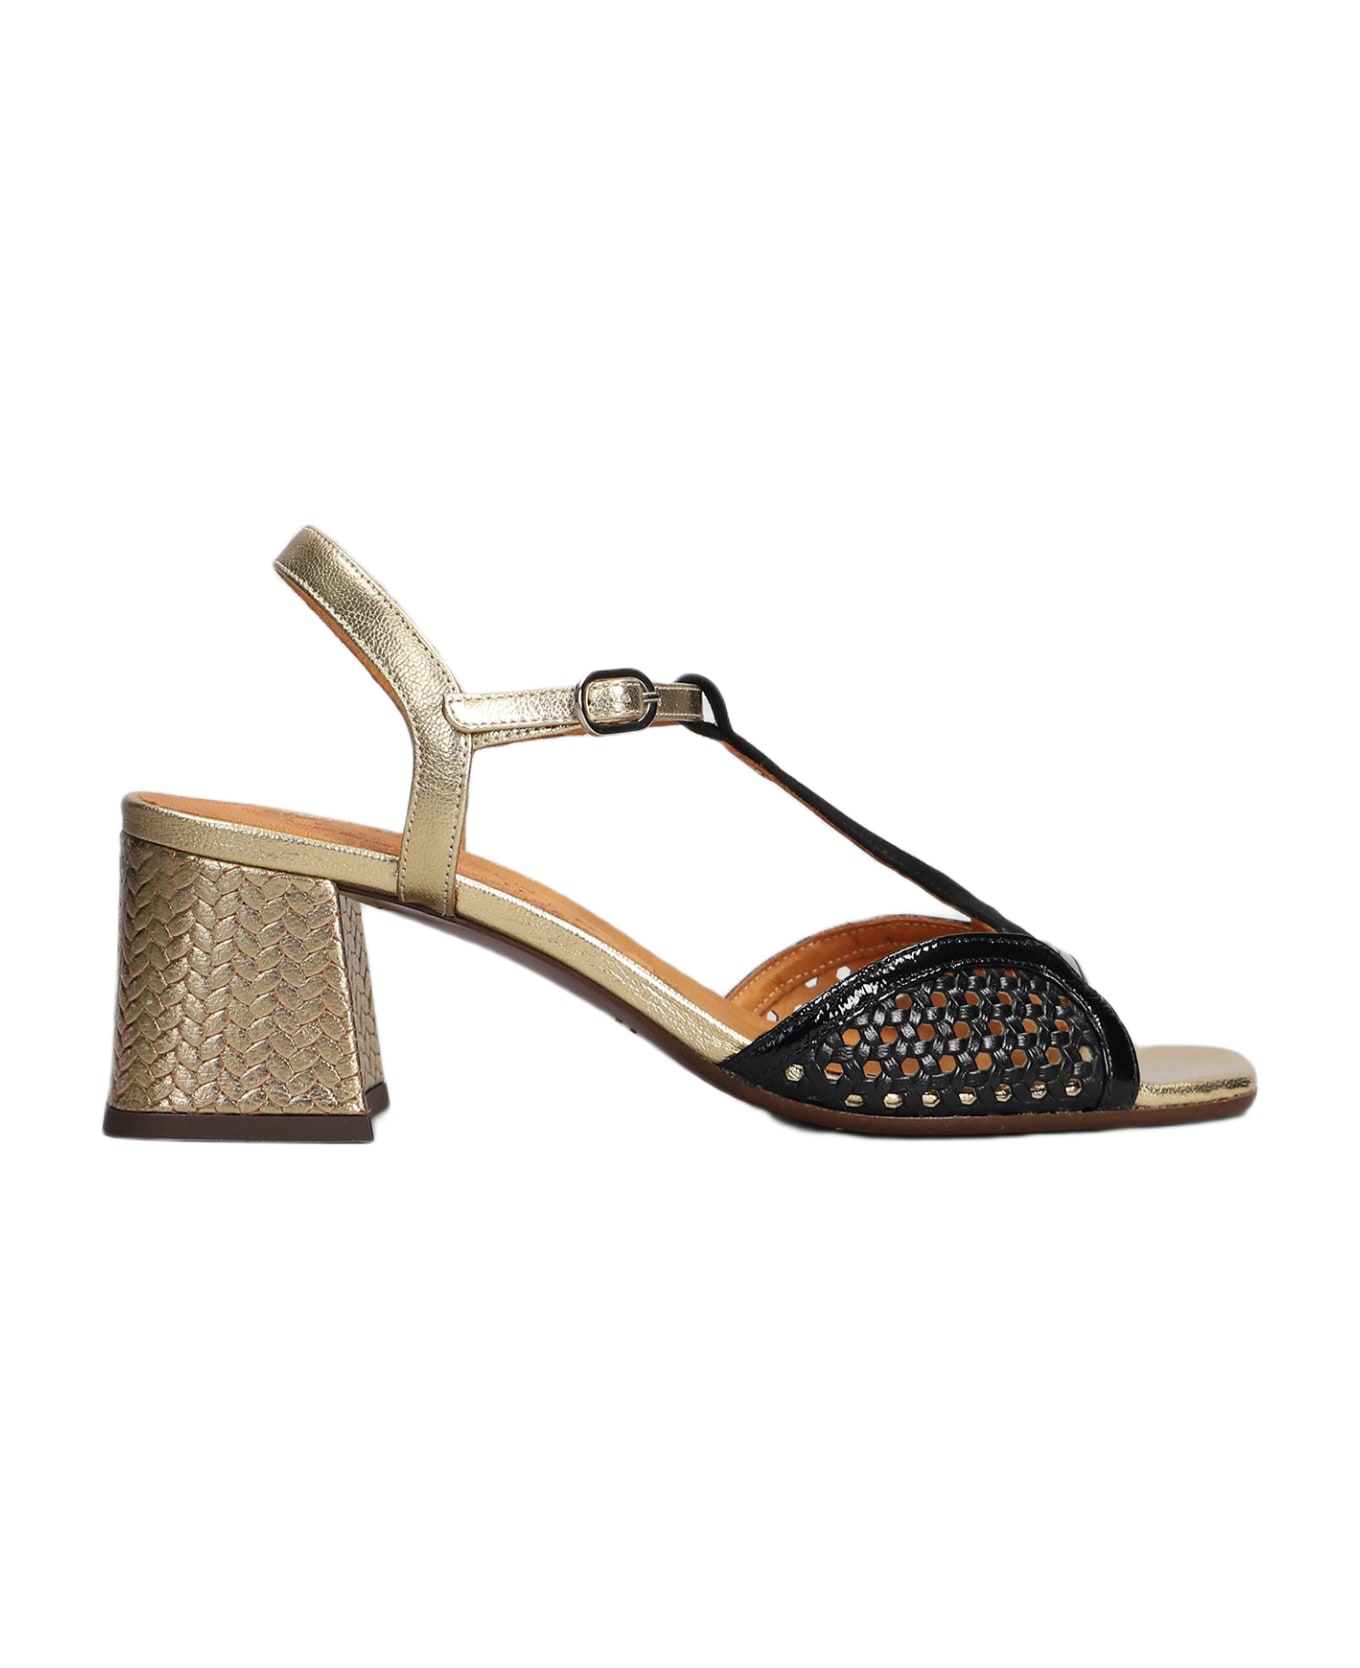 Chie Mihara Lipico Sandals In Black Leather - black